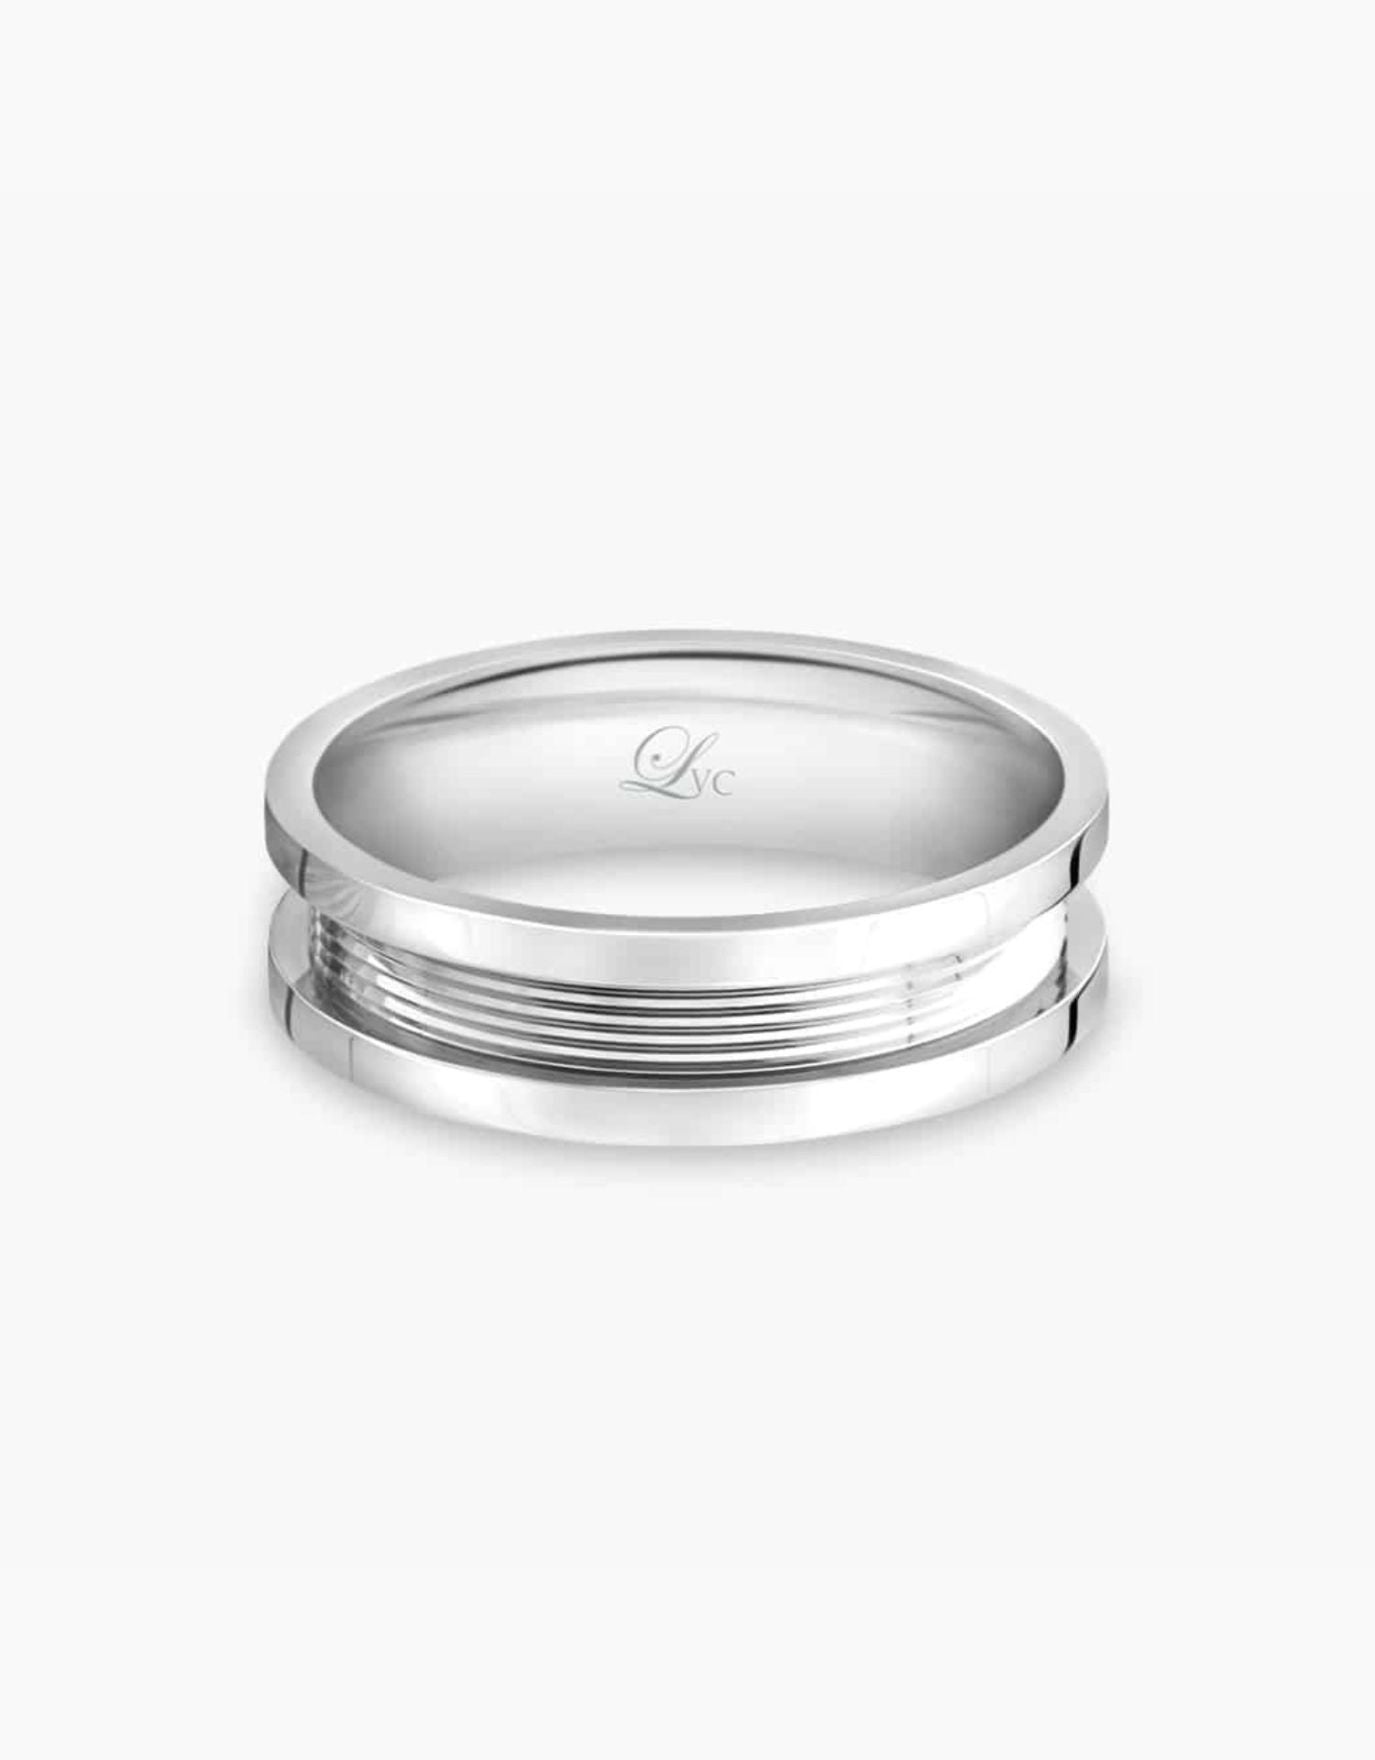 LVC Promise Pure Wedding Band